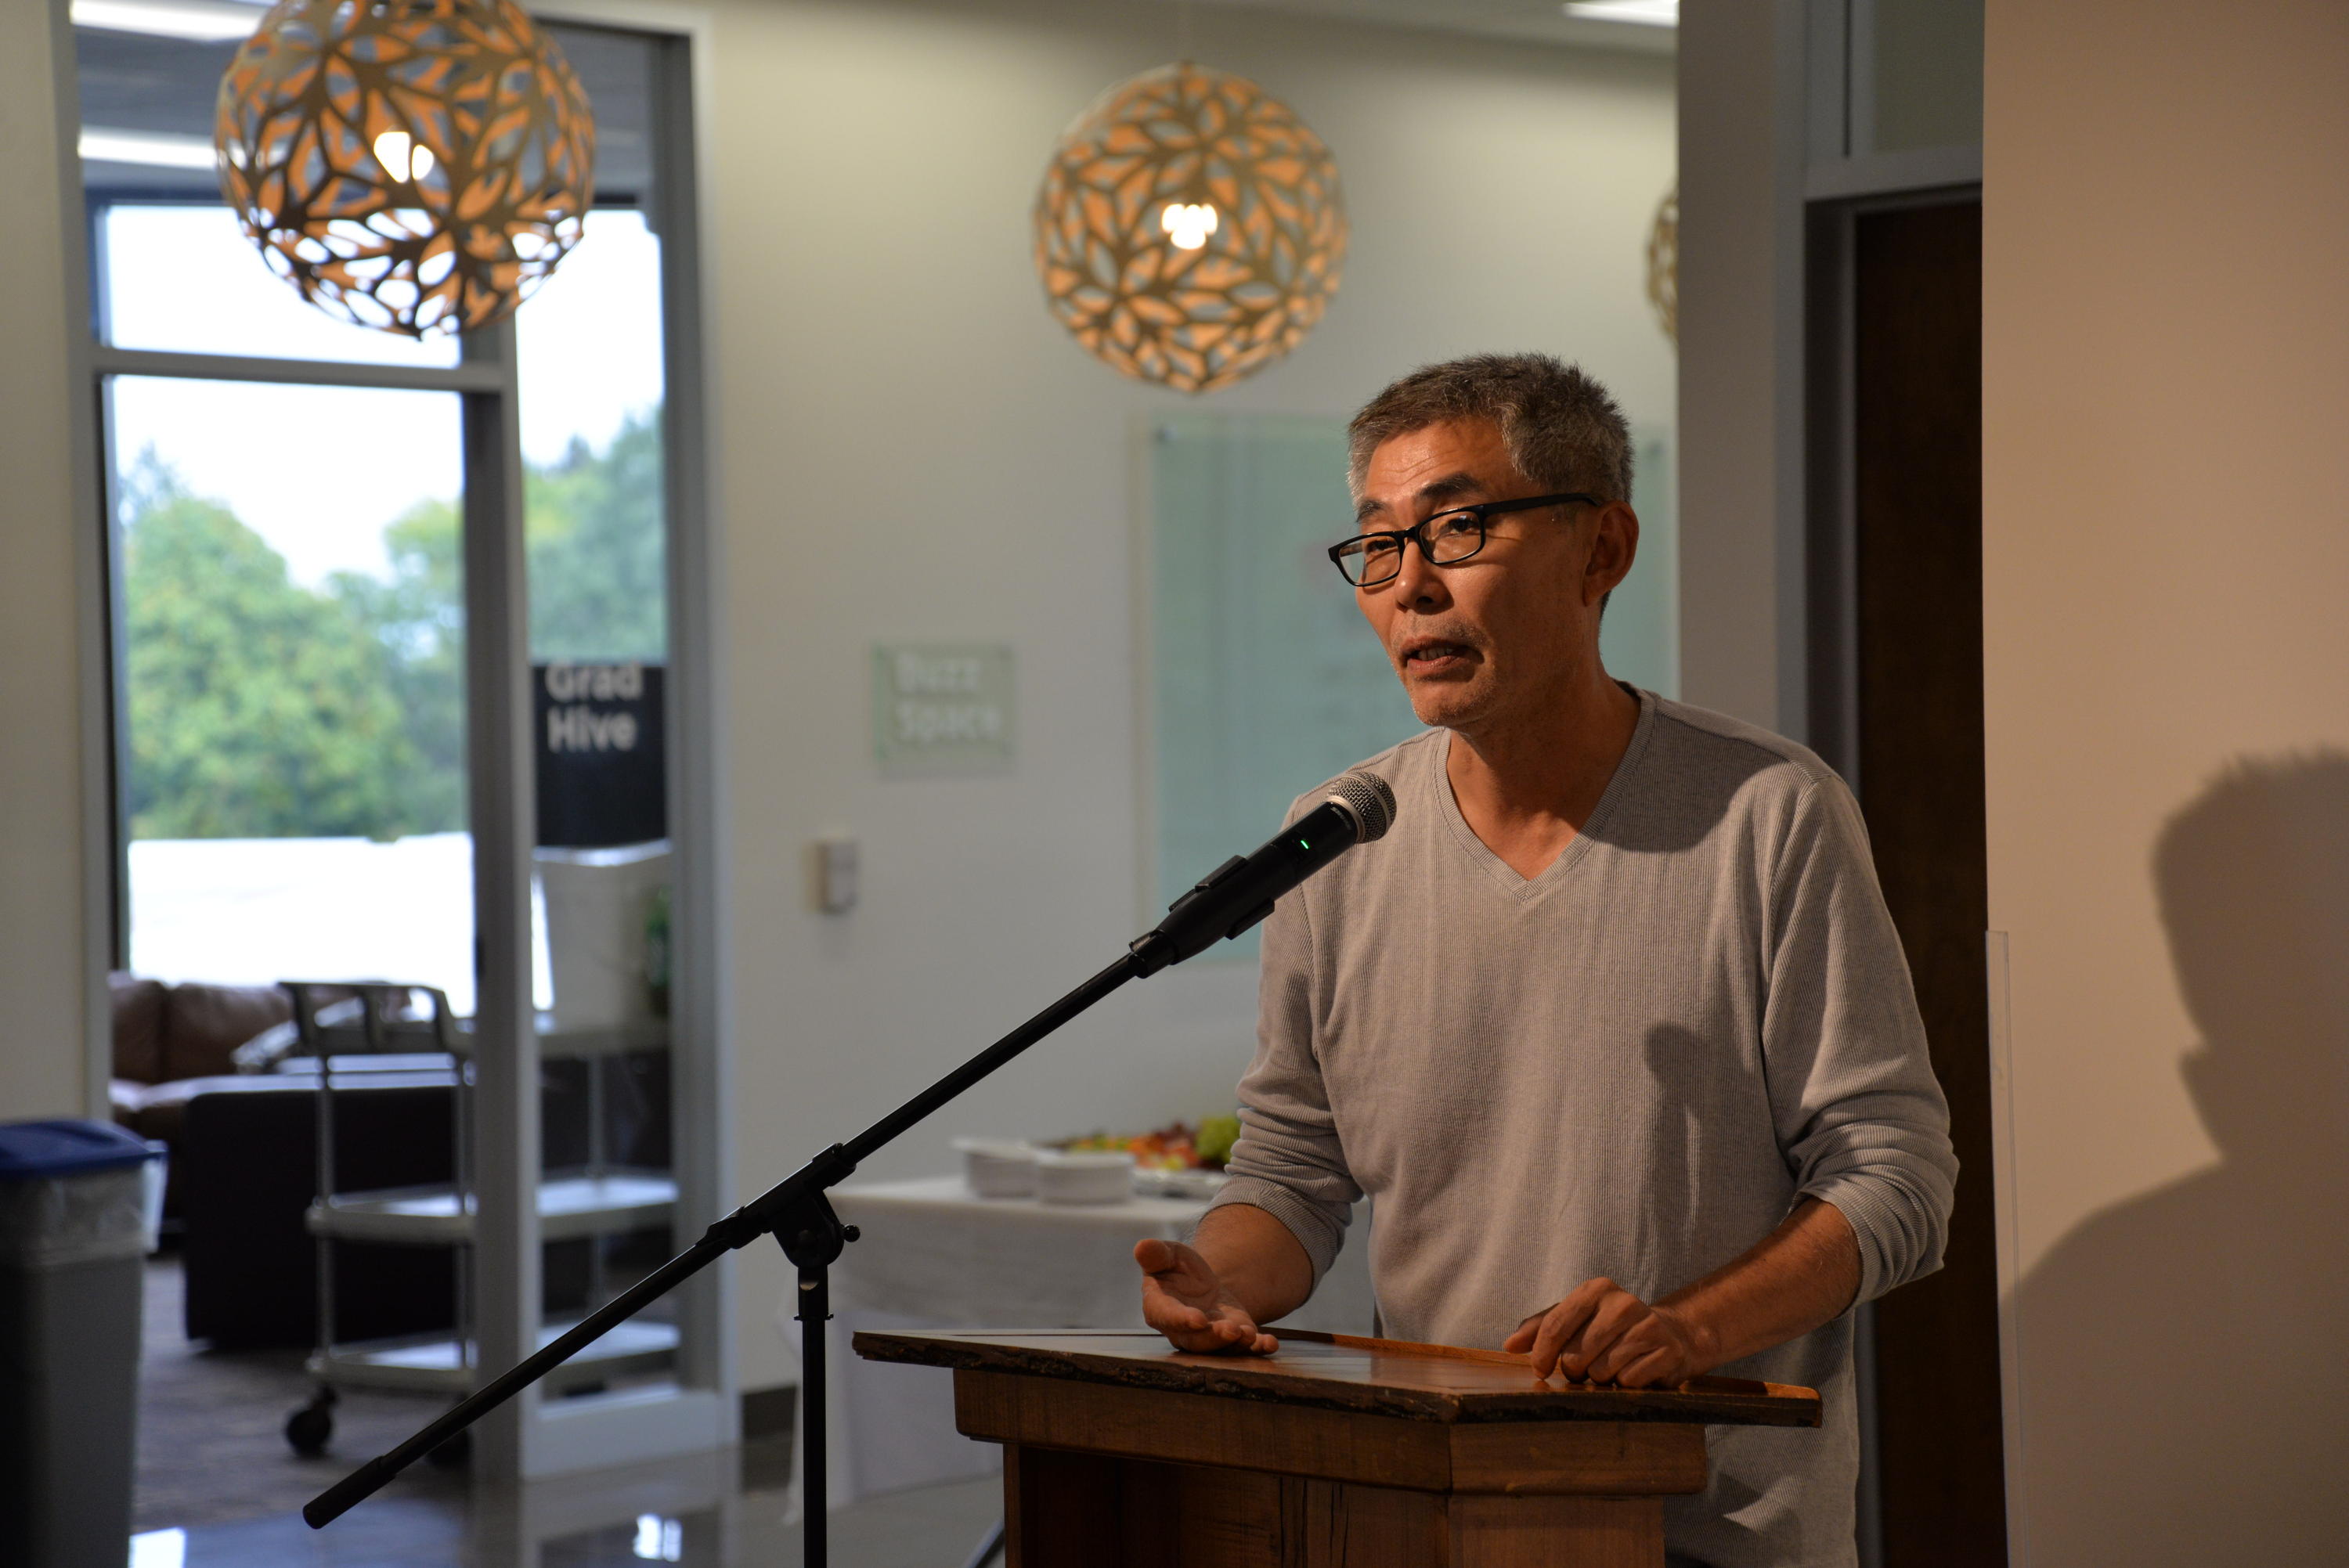 Heng-Gil Han speaking to exhibit reception guests